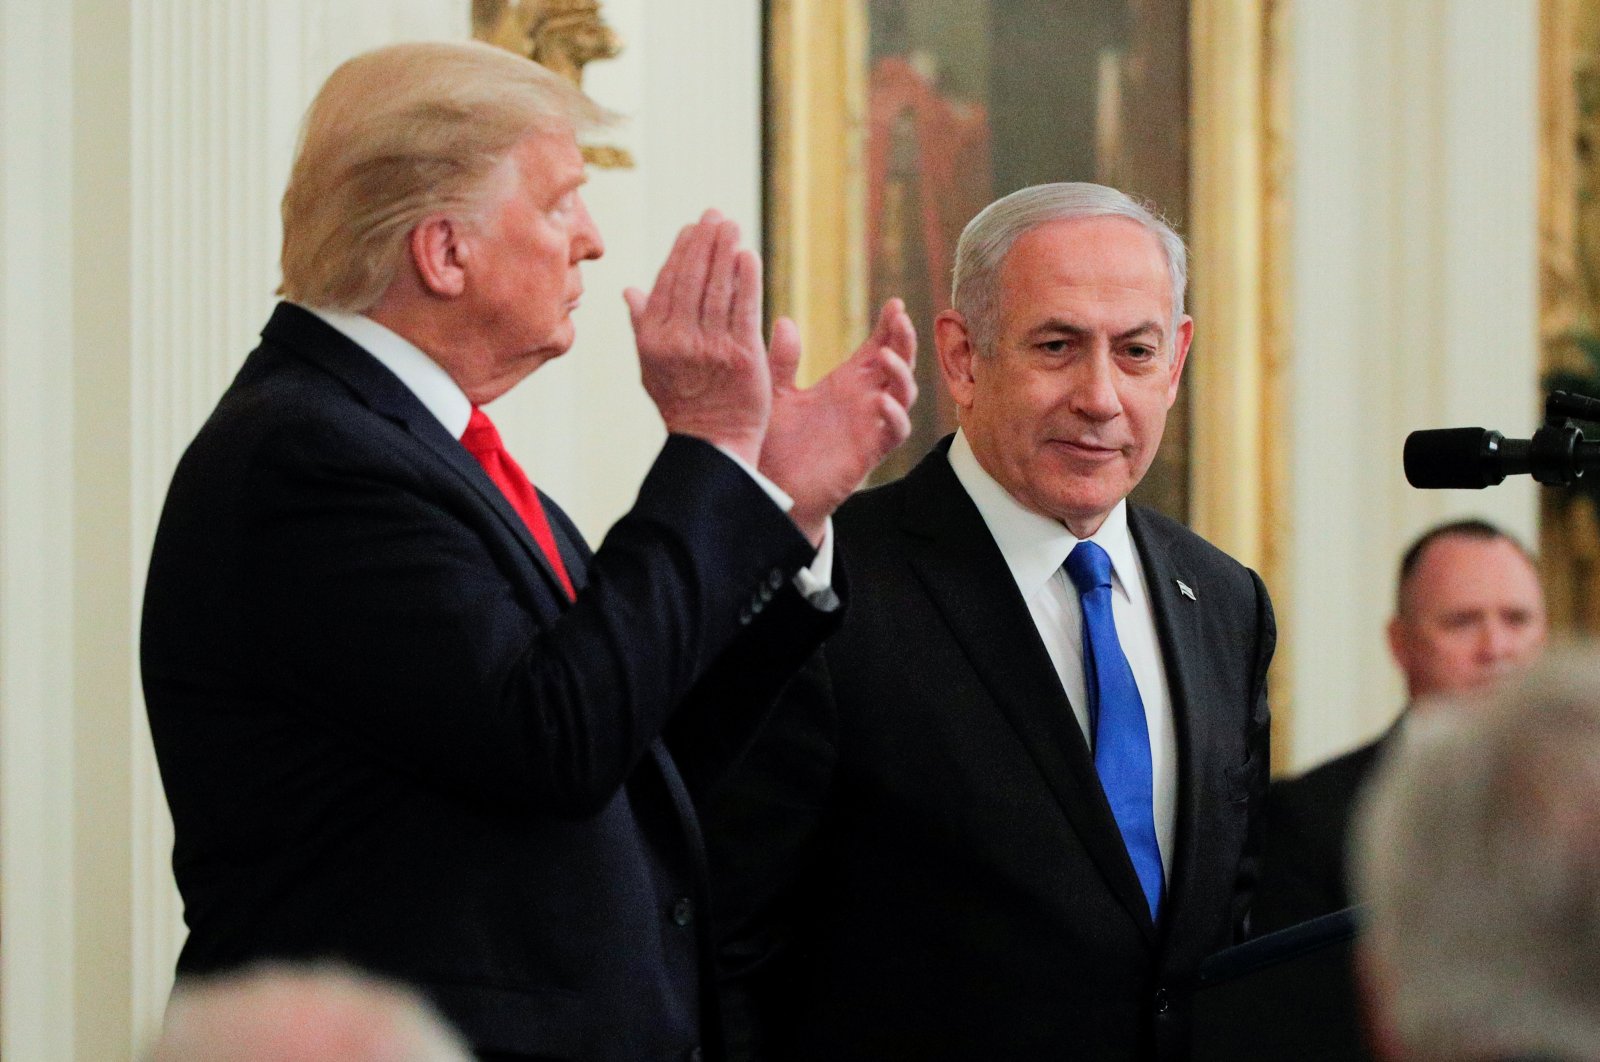 U.S. President Donald Trump applauds Israel's Prime Minister Benjamin Netanyahu as they appear together at a joint news conference to discuss a new Middle East peace plan proposal in the East Room of the White House in Washington, Jan. 28, 2020. (REUTERS Photo)